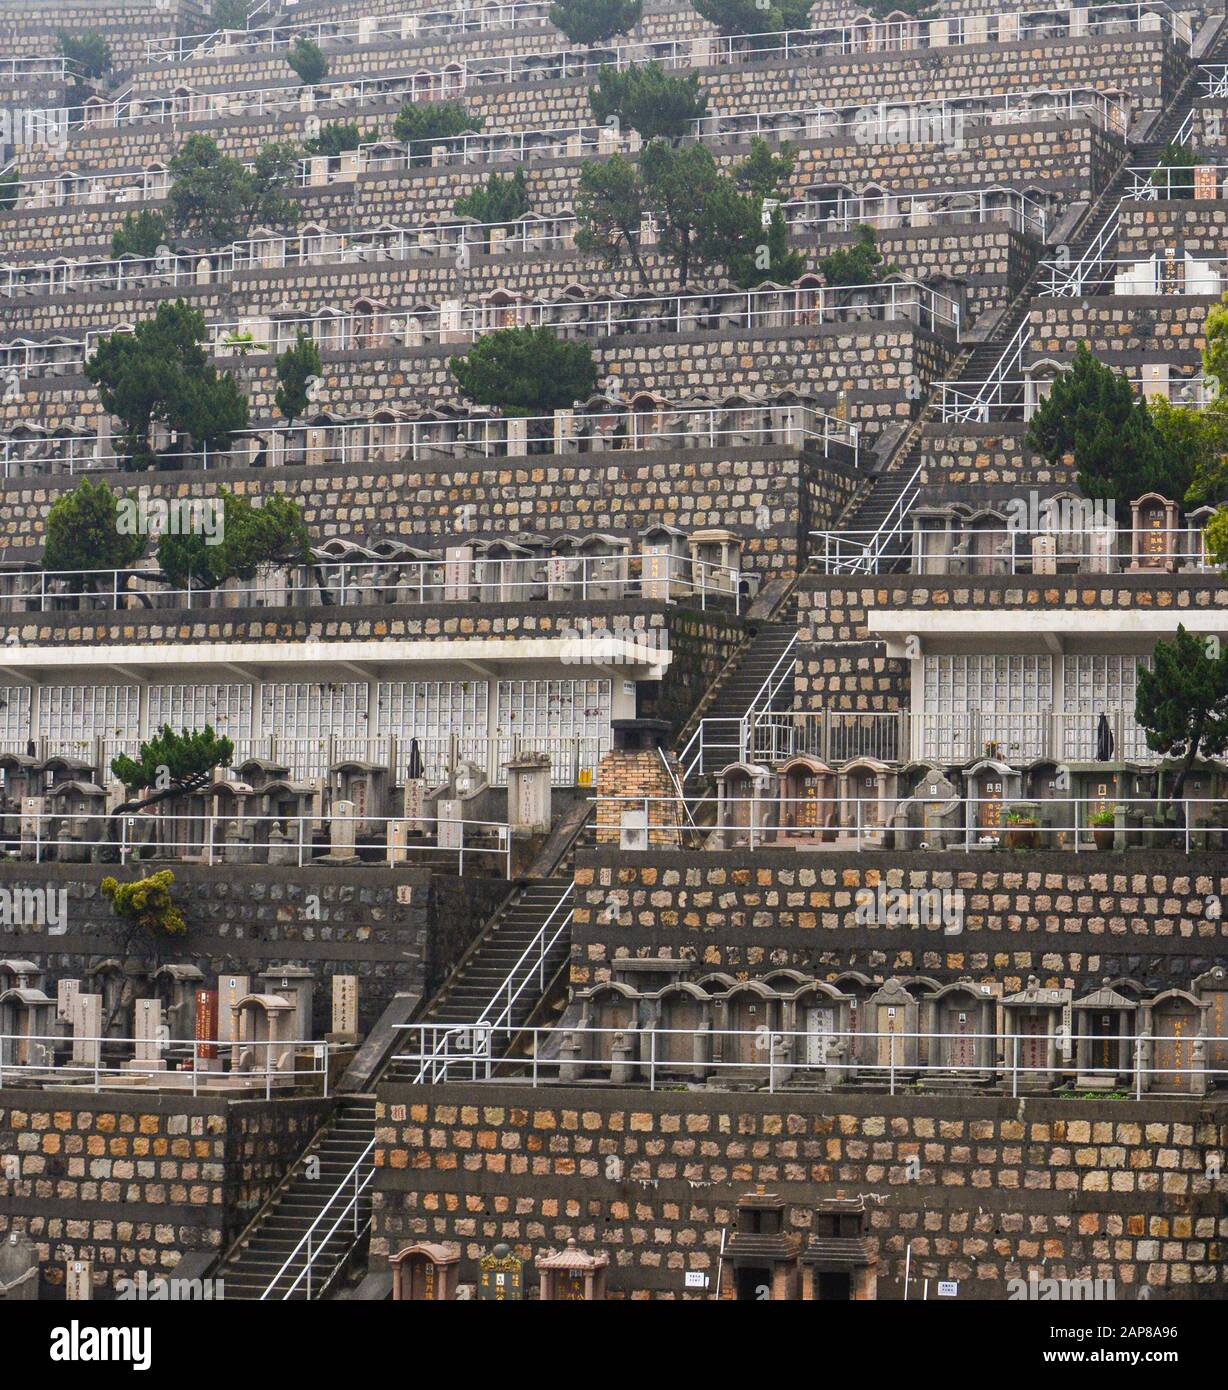 Hong Kong - March 9, 2019 - Stairway on a hillside of numerous tombstones in a crowded Hong Kong cemetery Stock Photo